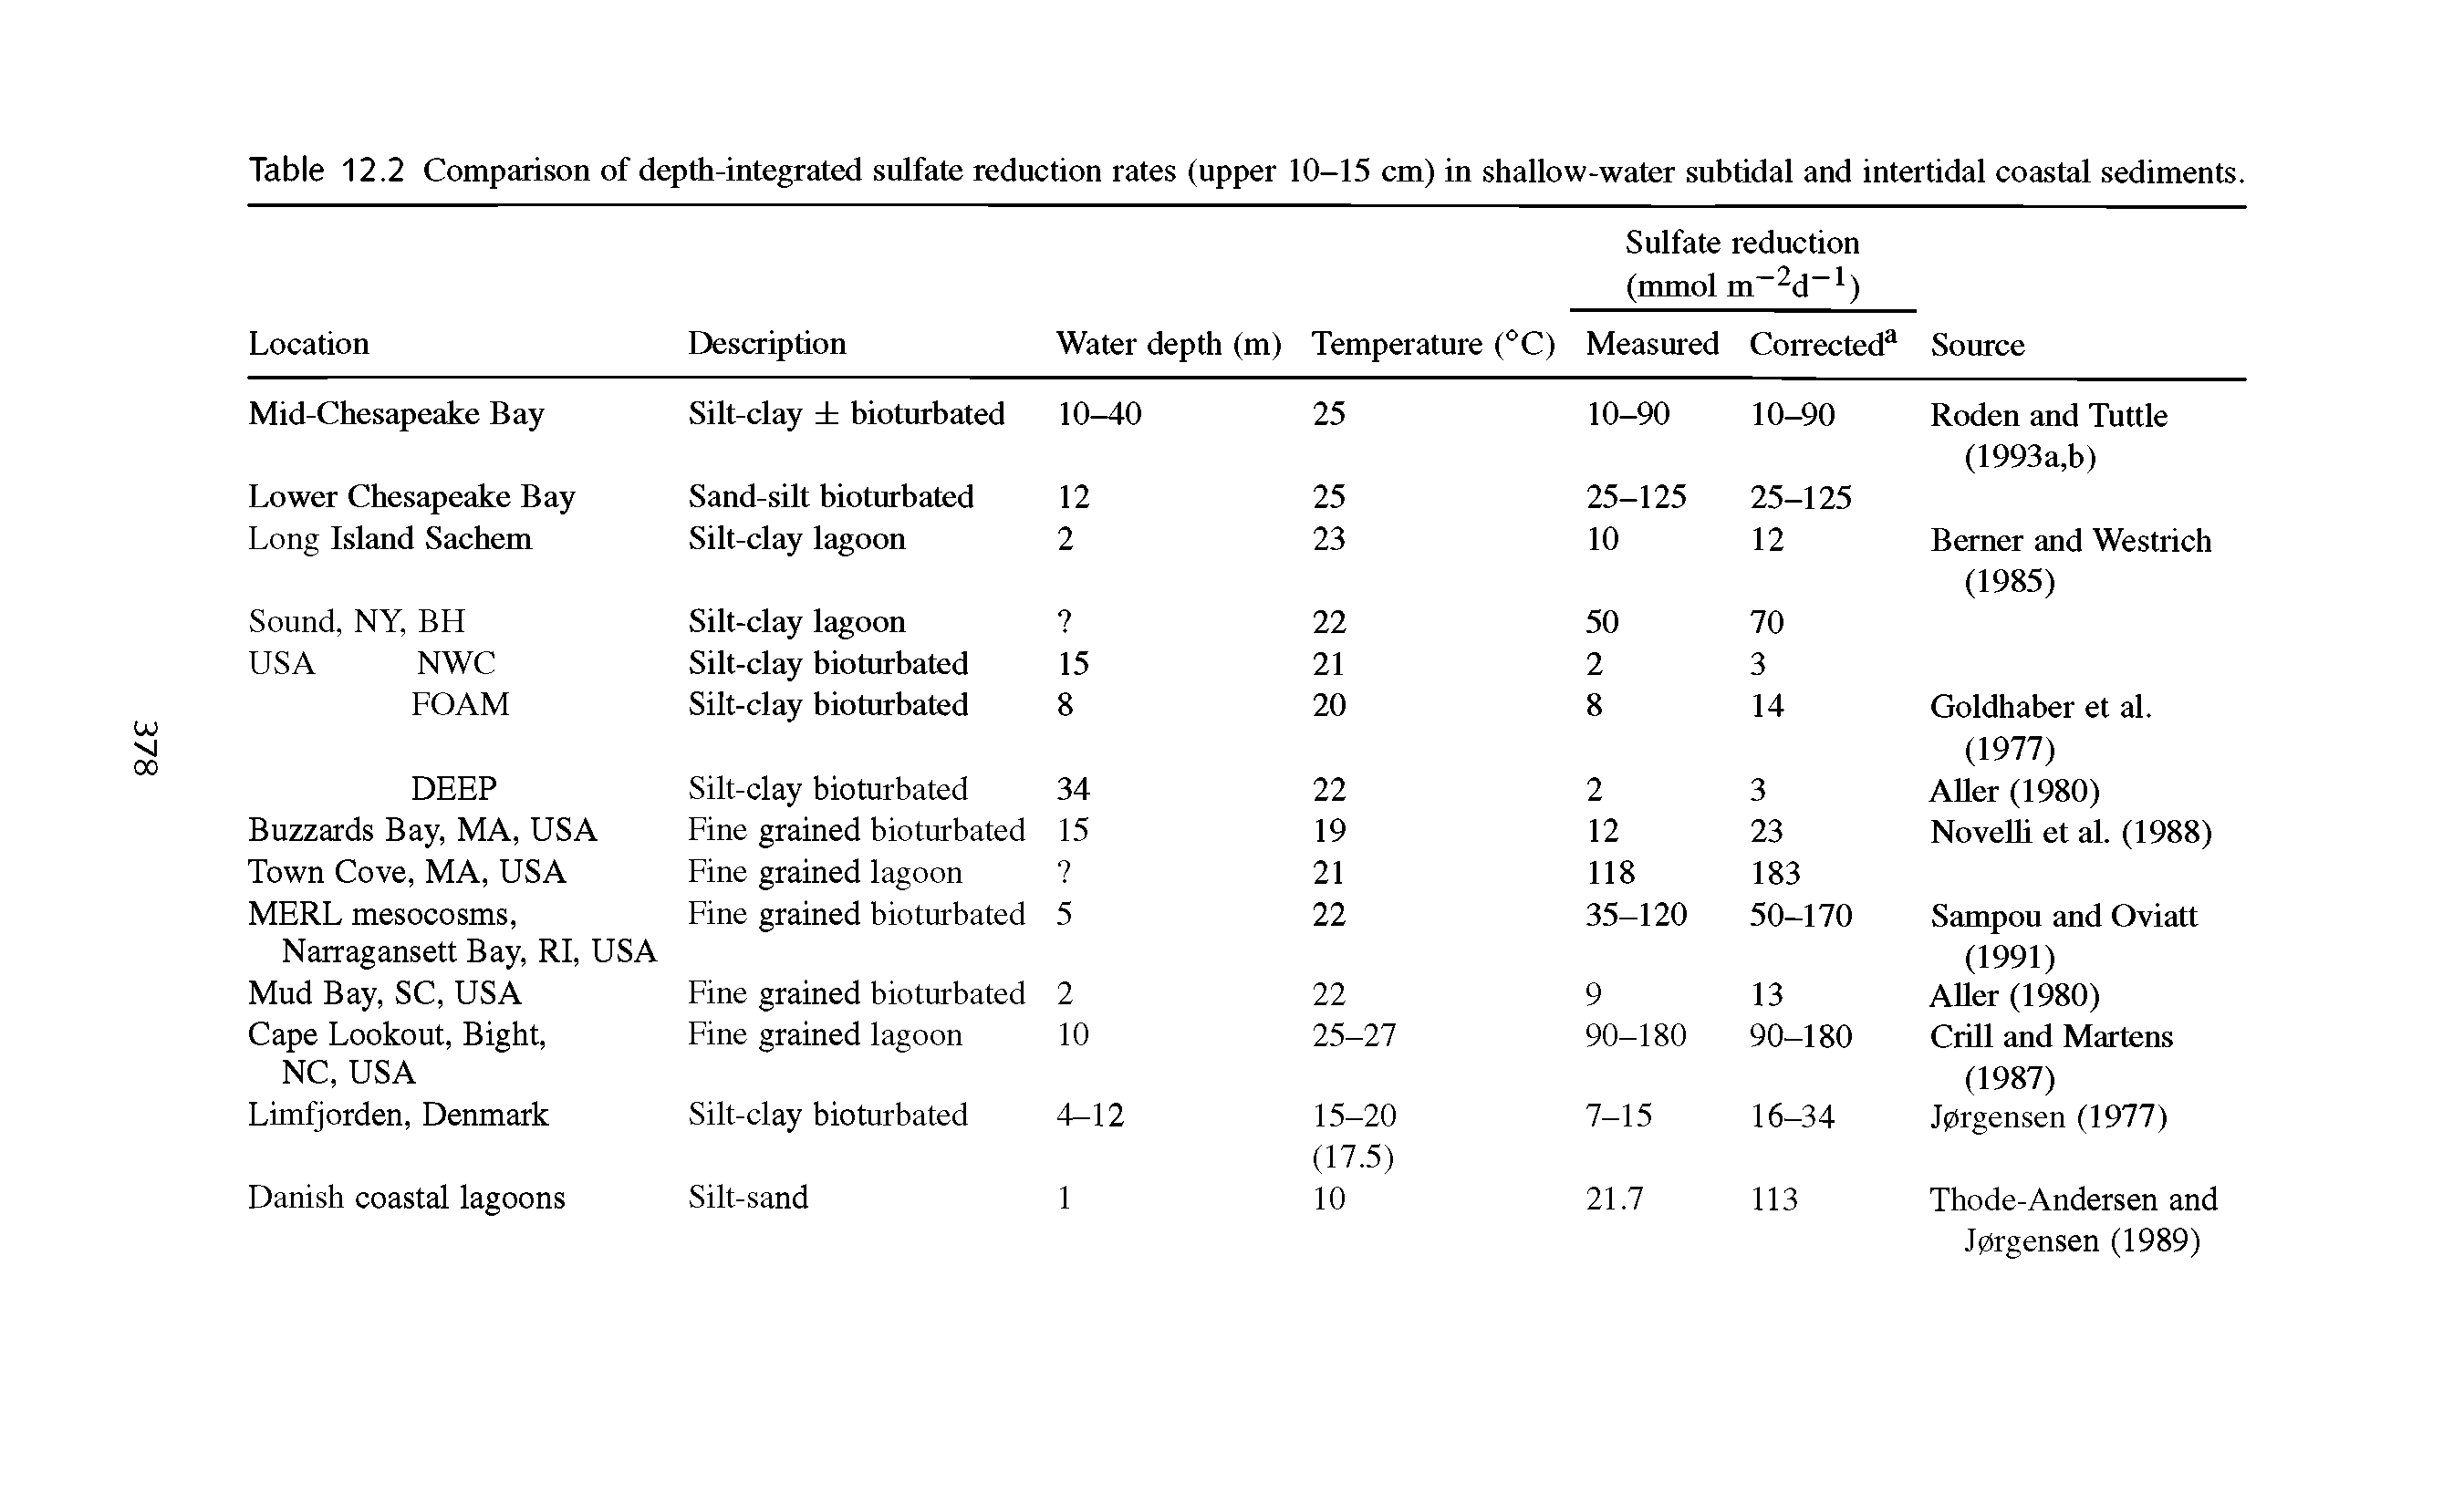 Table 12.2 Comparison of depth-integrated sulfate reduction rates (upper 10-15 cm) in shallow-water subtidal and intertidal coastal sediments.